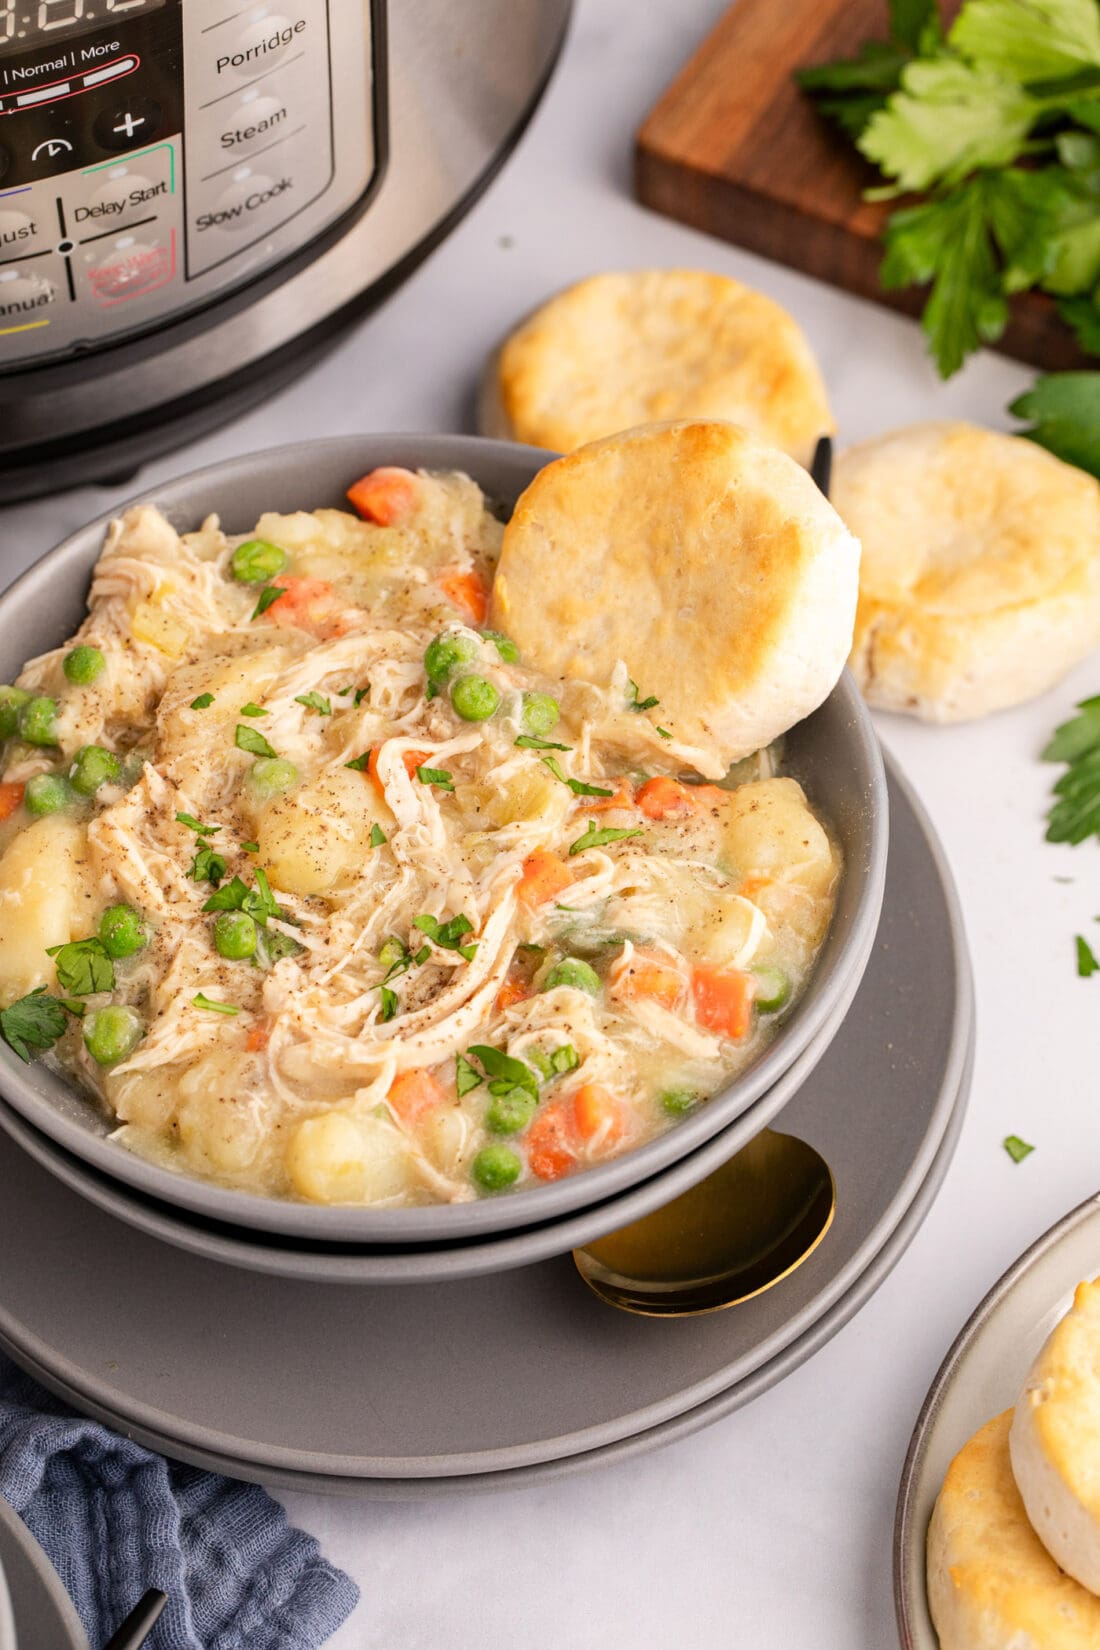 Bowl of Instant Pot Chicken Pot Pie with biscuits on the side